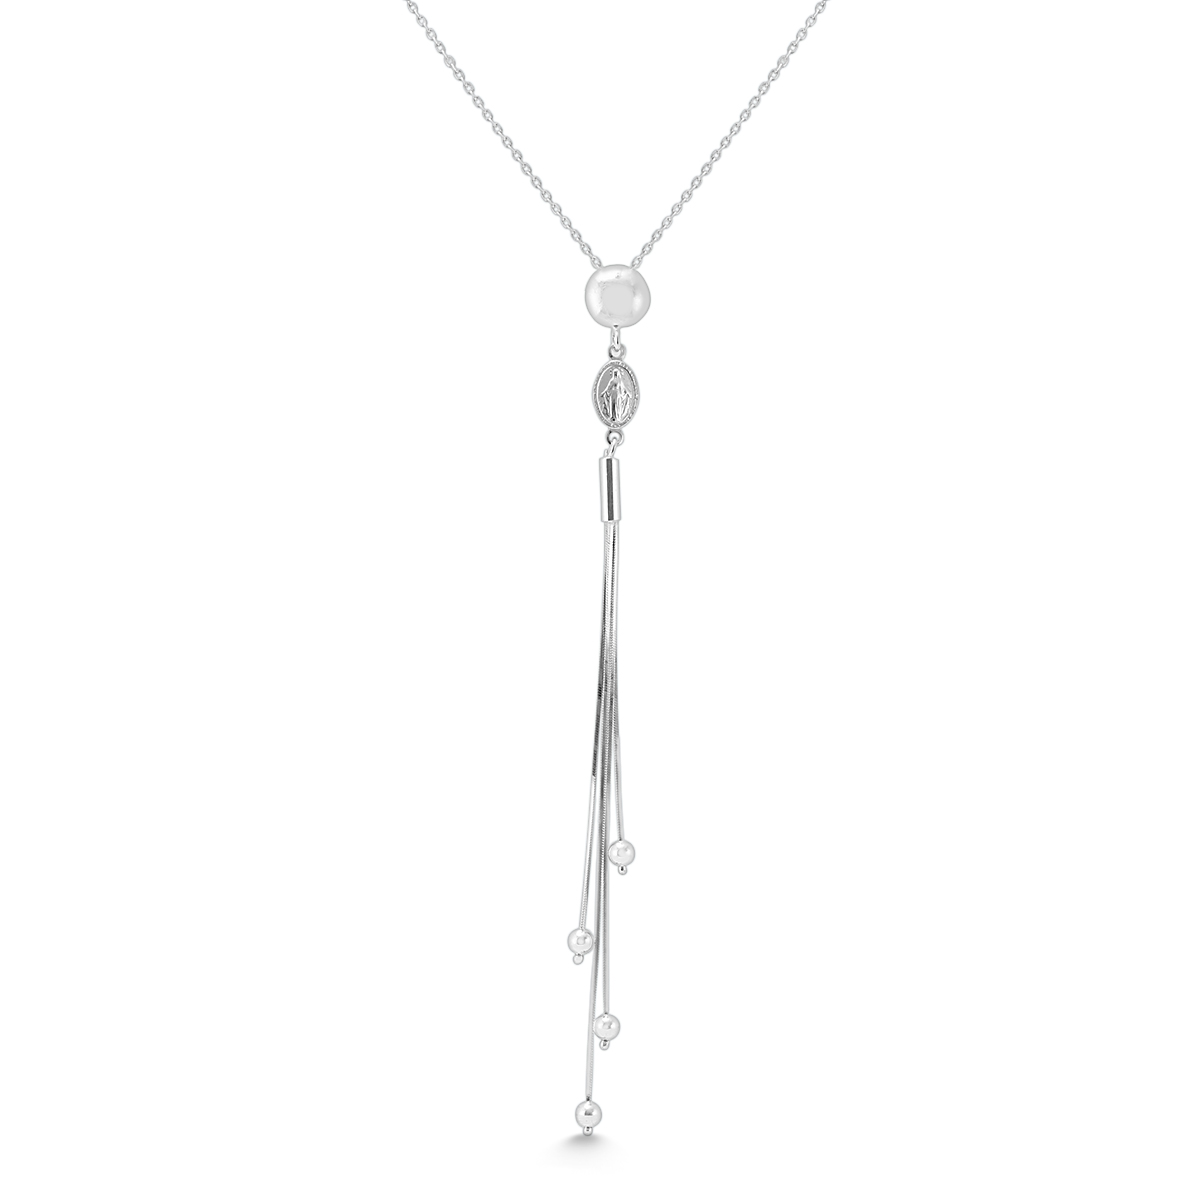 Virgin Mary and Cross Charm Necklace in.925 Sterling Silver